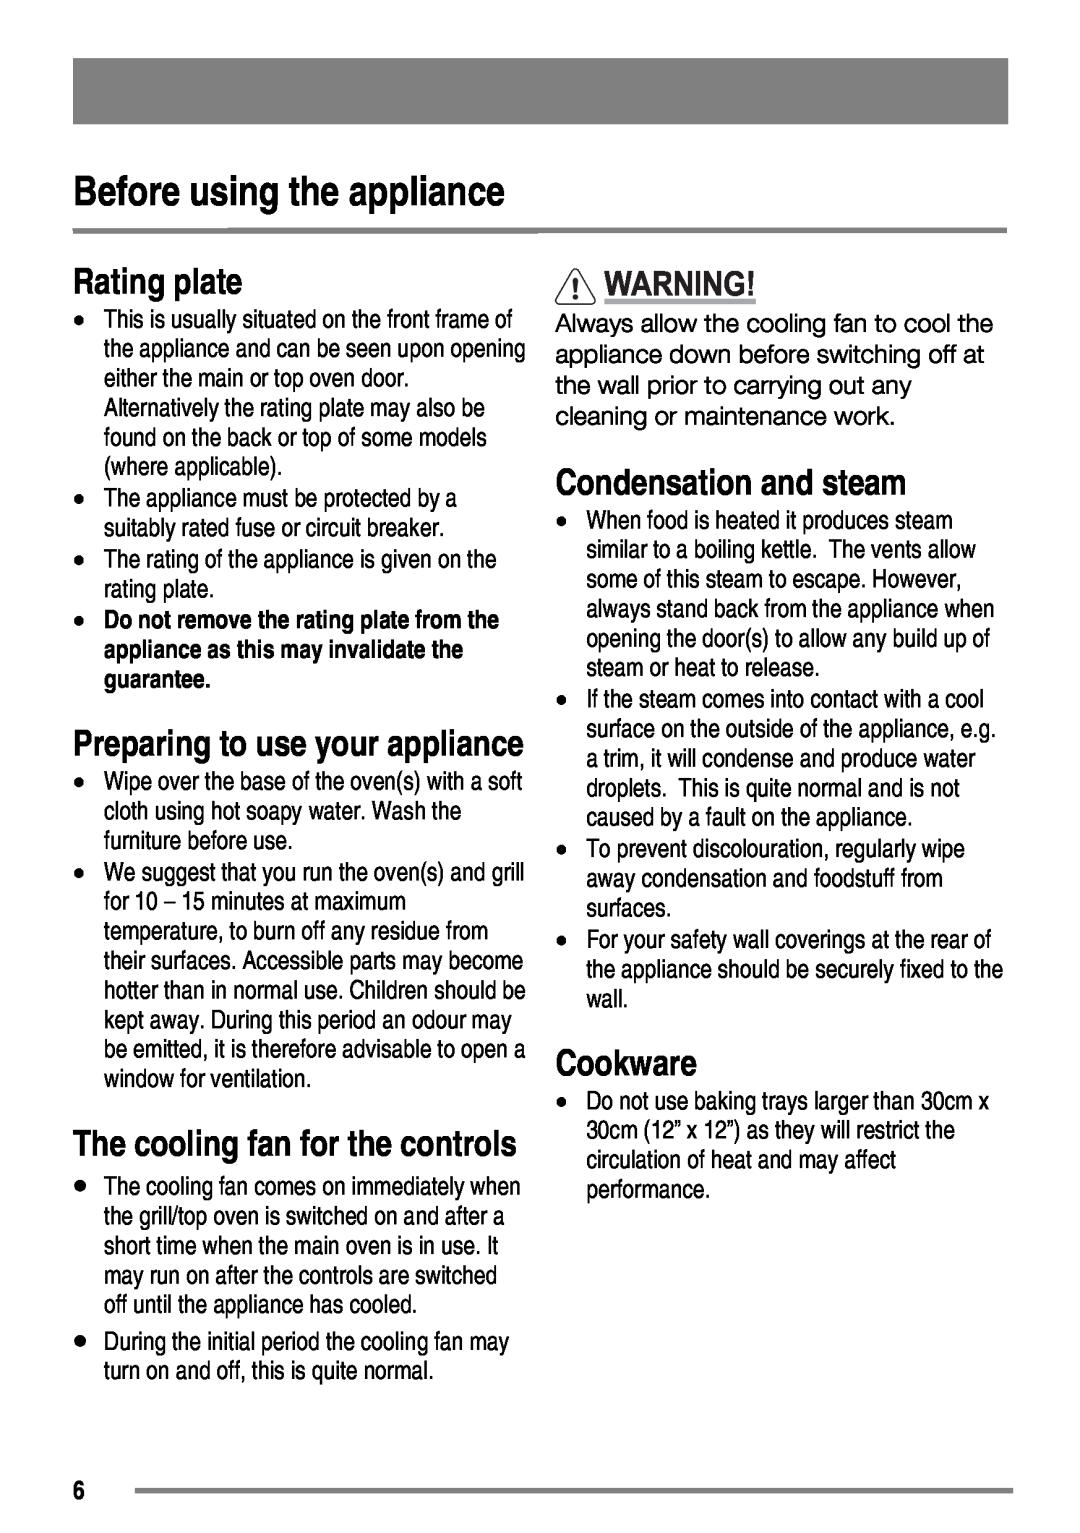 Zanussi ZKG6040 user manual Before using the appliance, Rating plate, Cookware, The cooling fan for the controls 